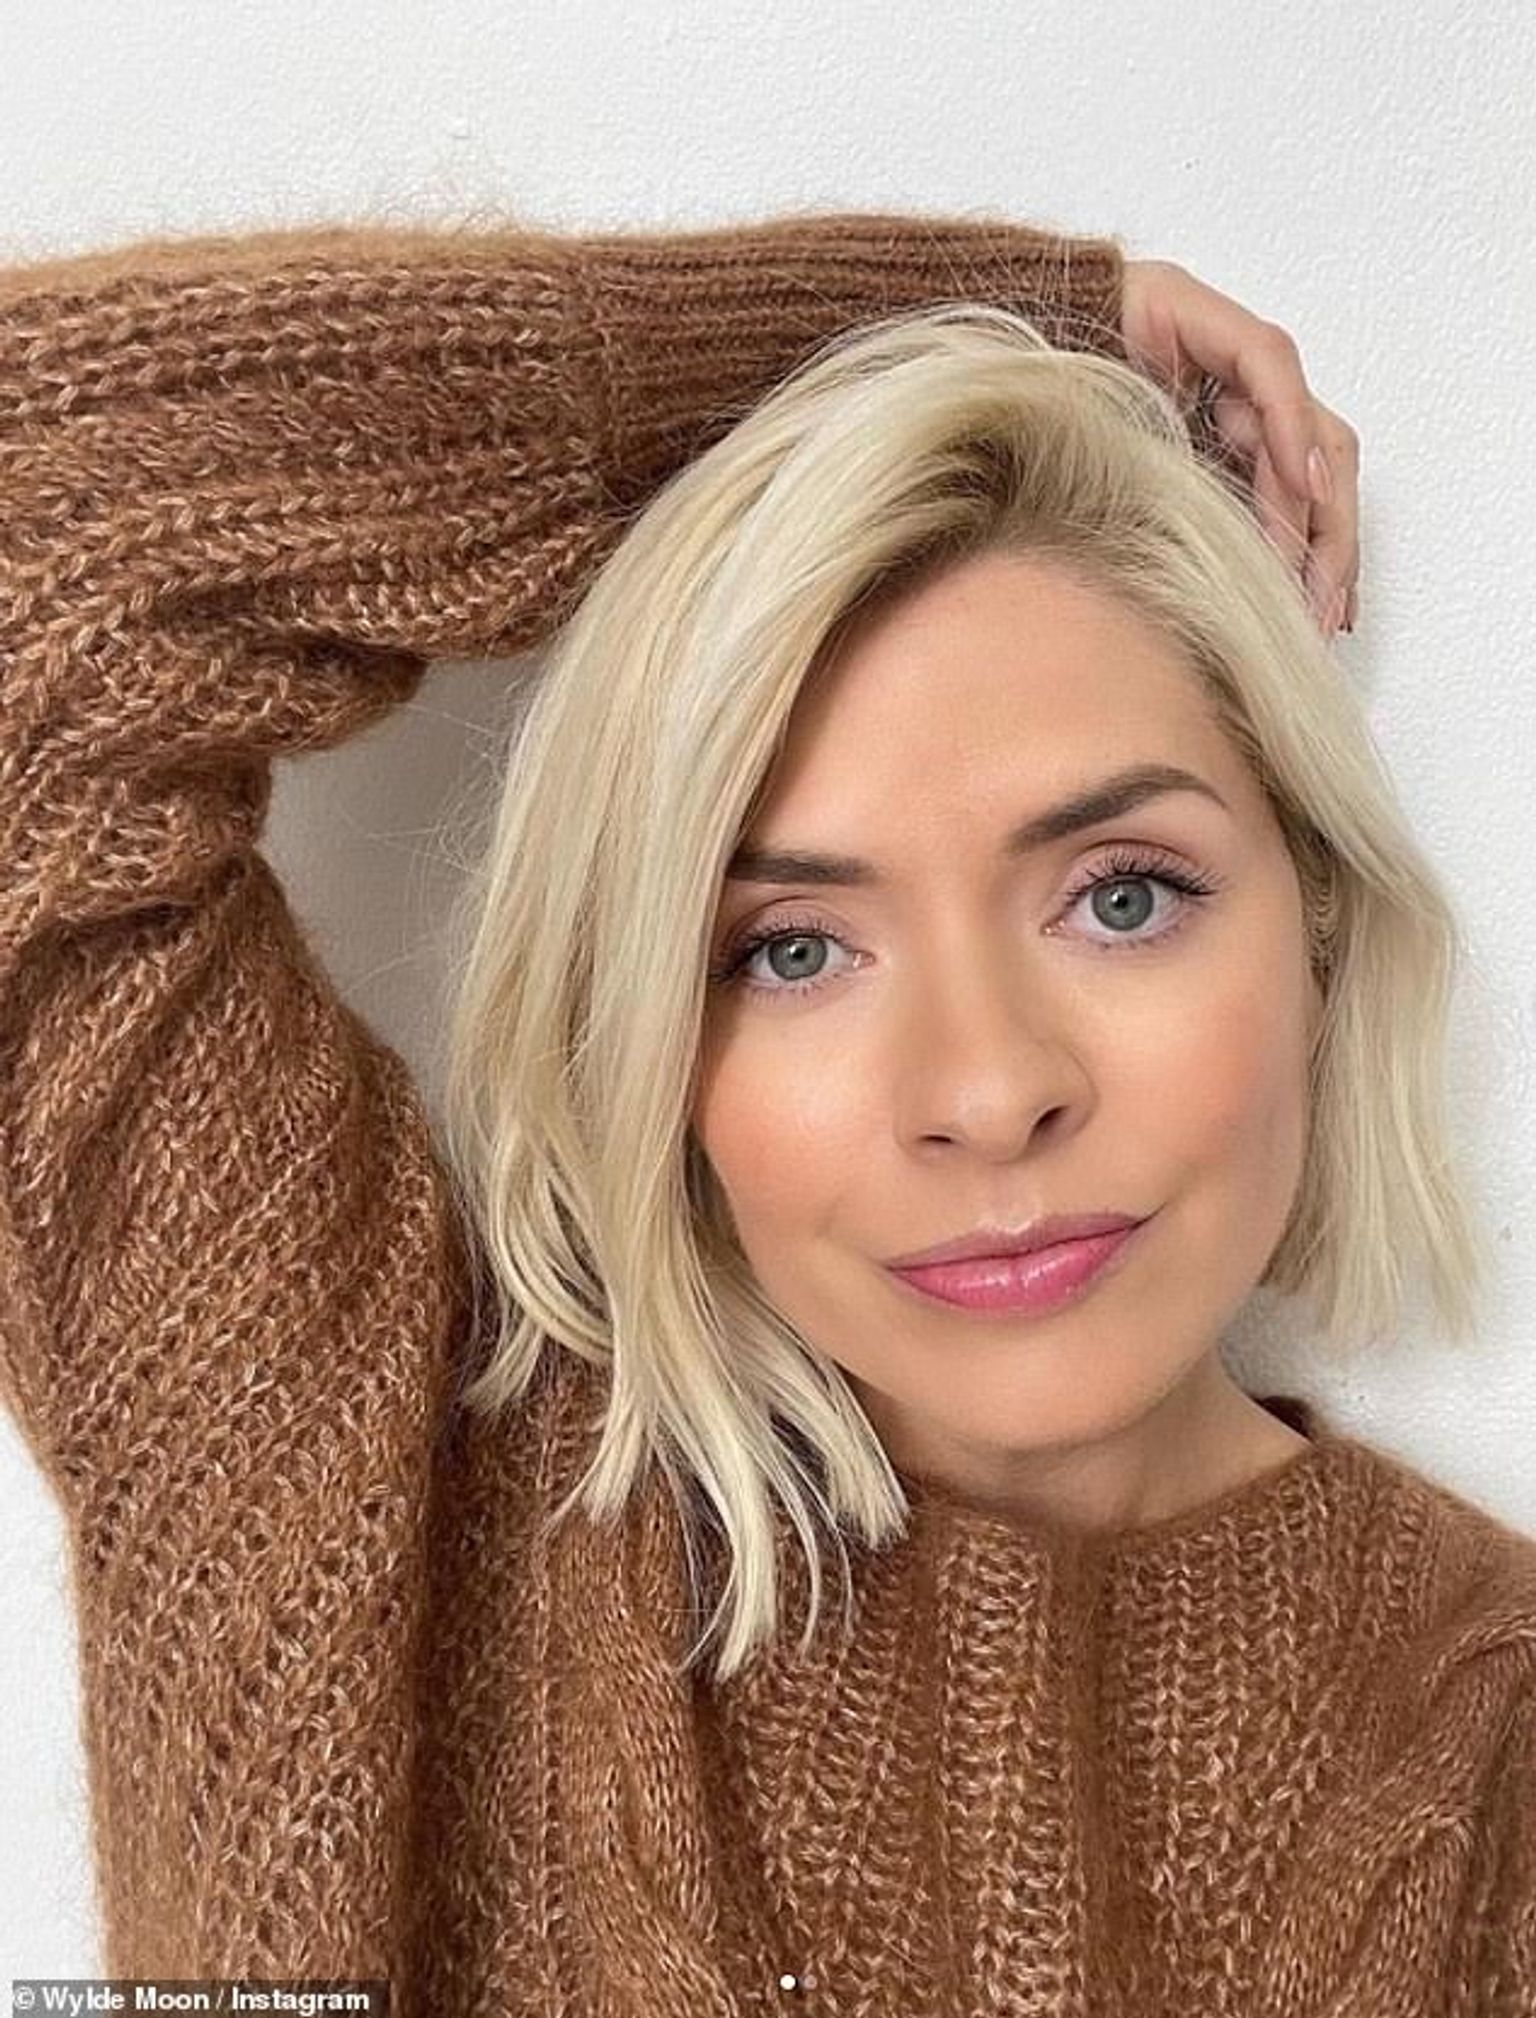 Holly Willoughby is looking amazing in her 40s